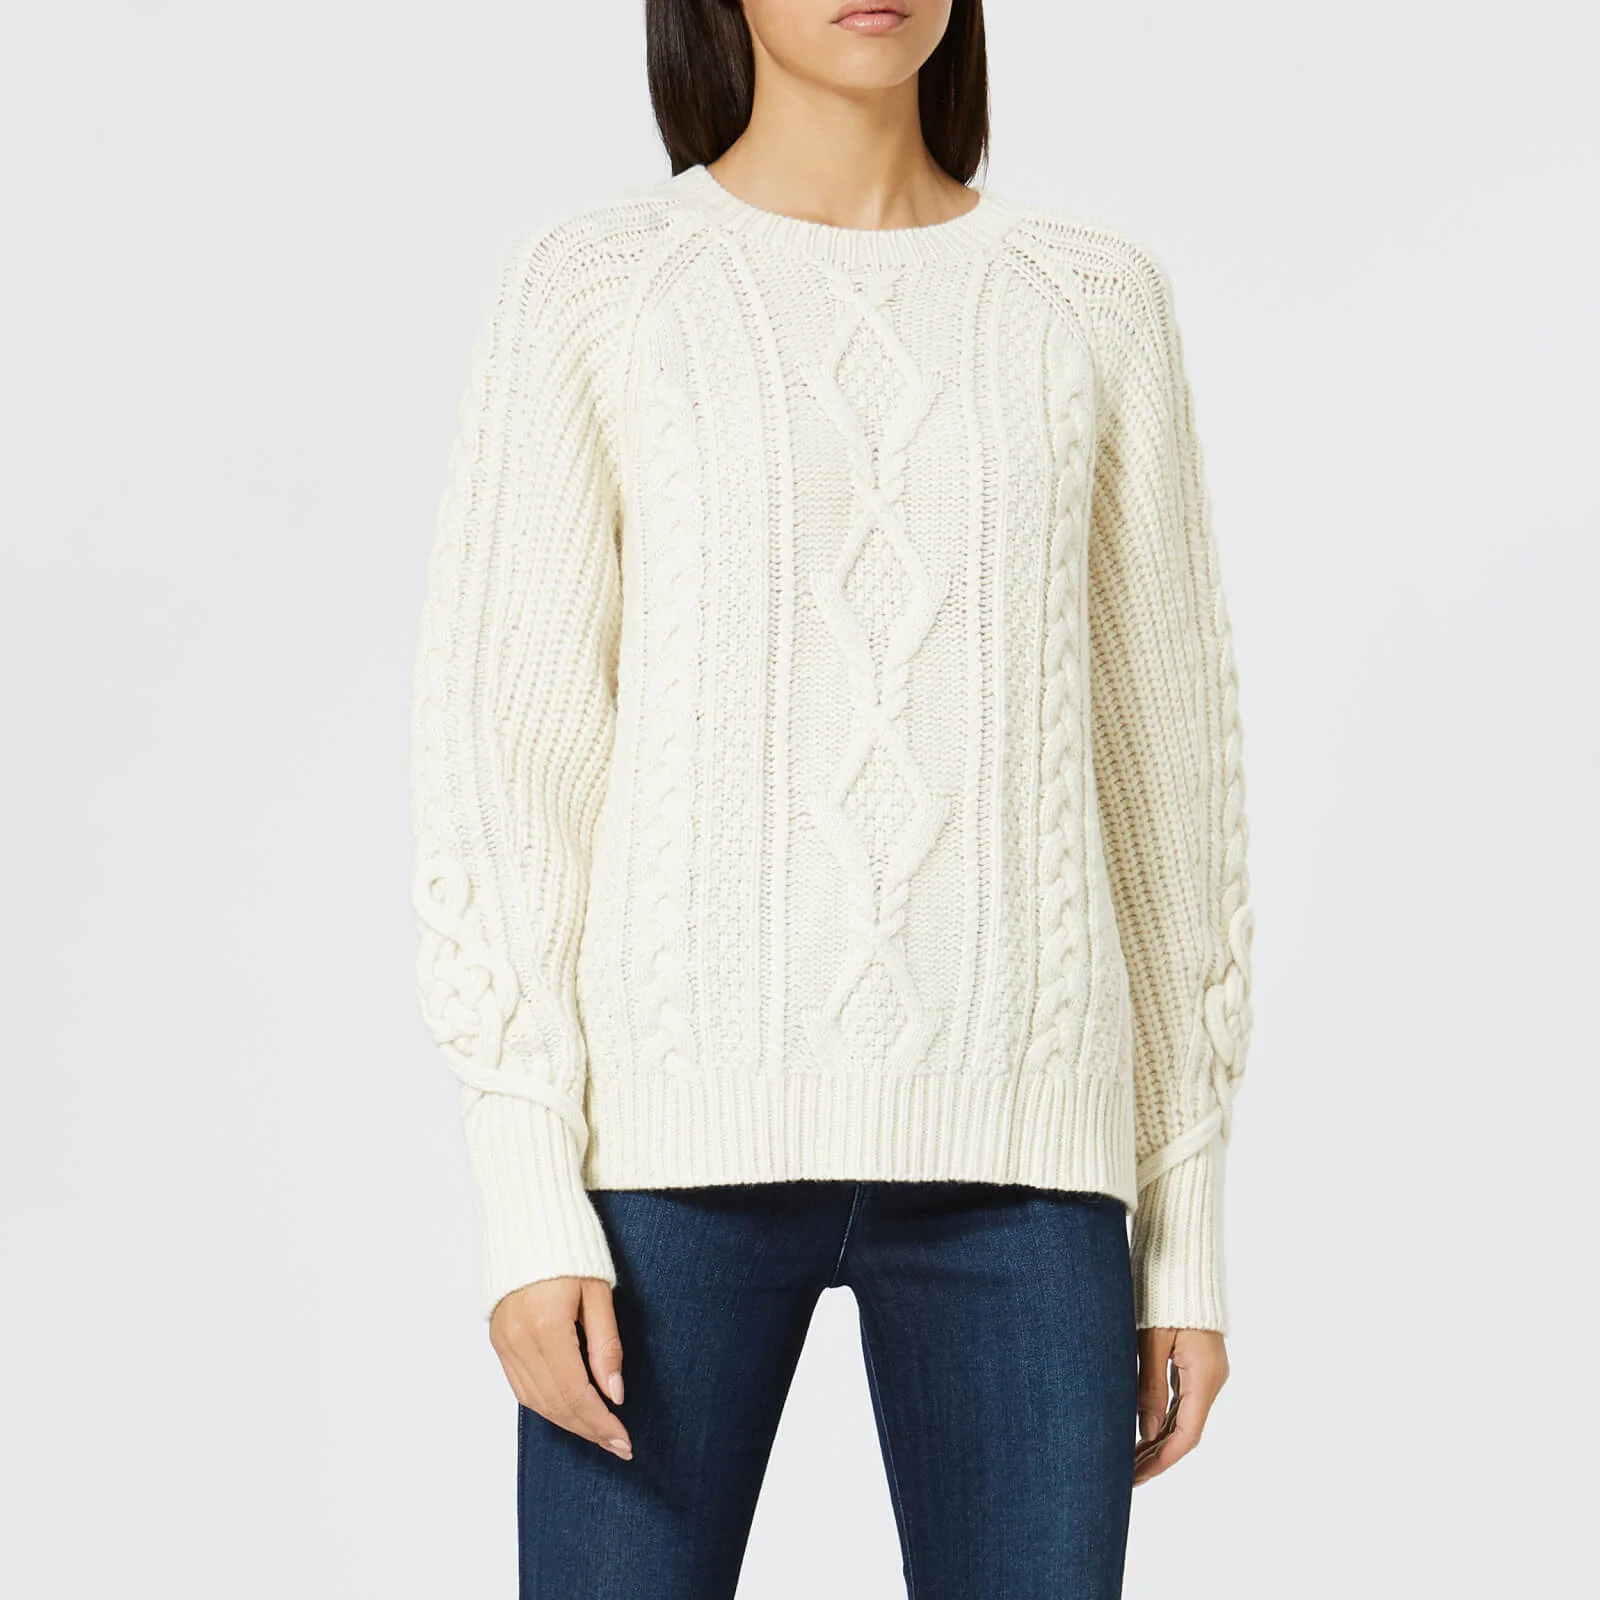 Polo Ralph Lauren Women's Chunky Cable Knit Jumper - Cream Image 1